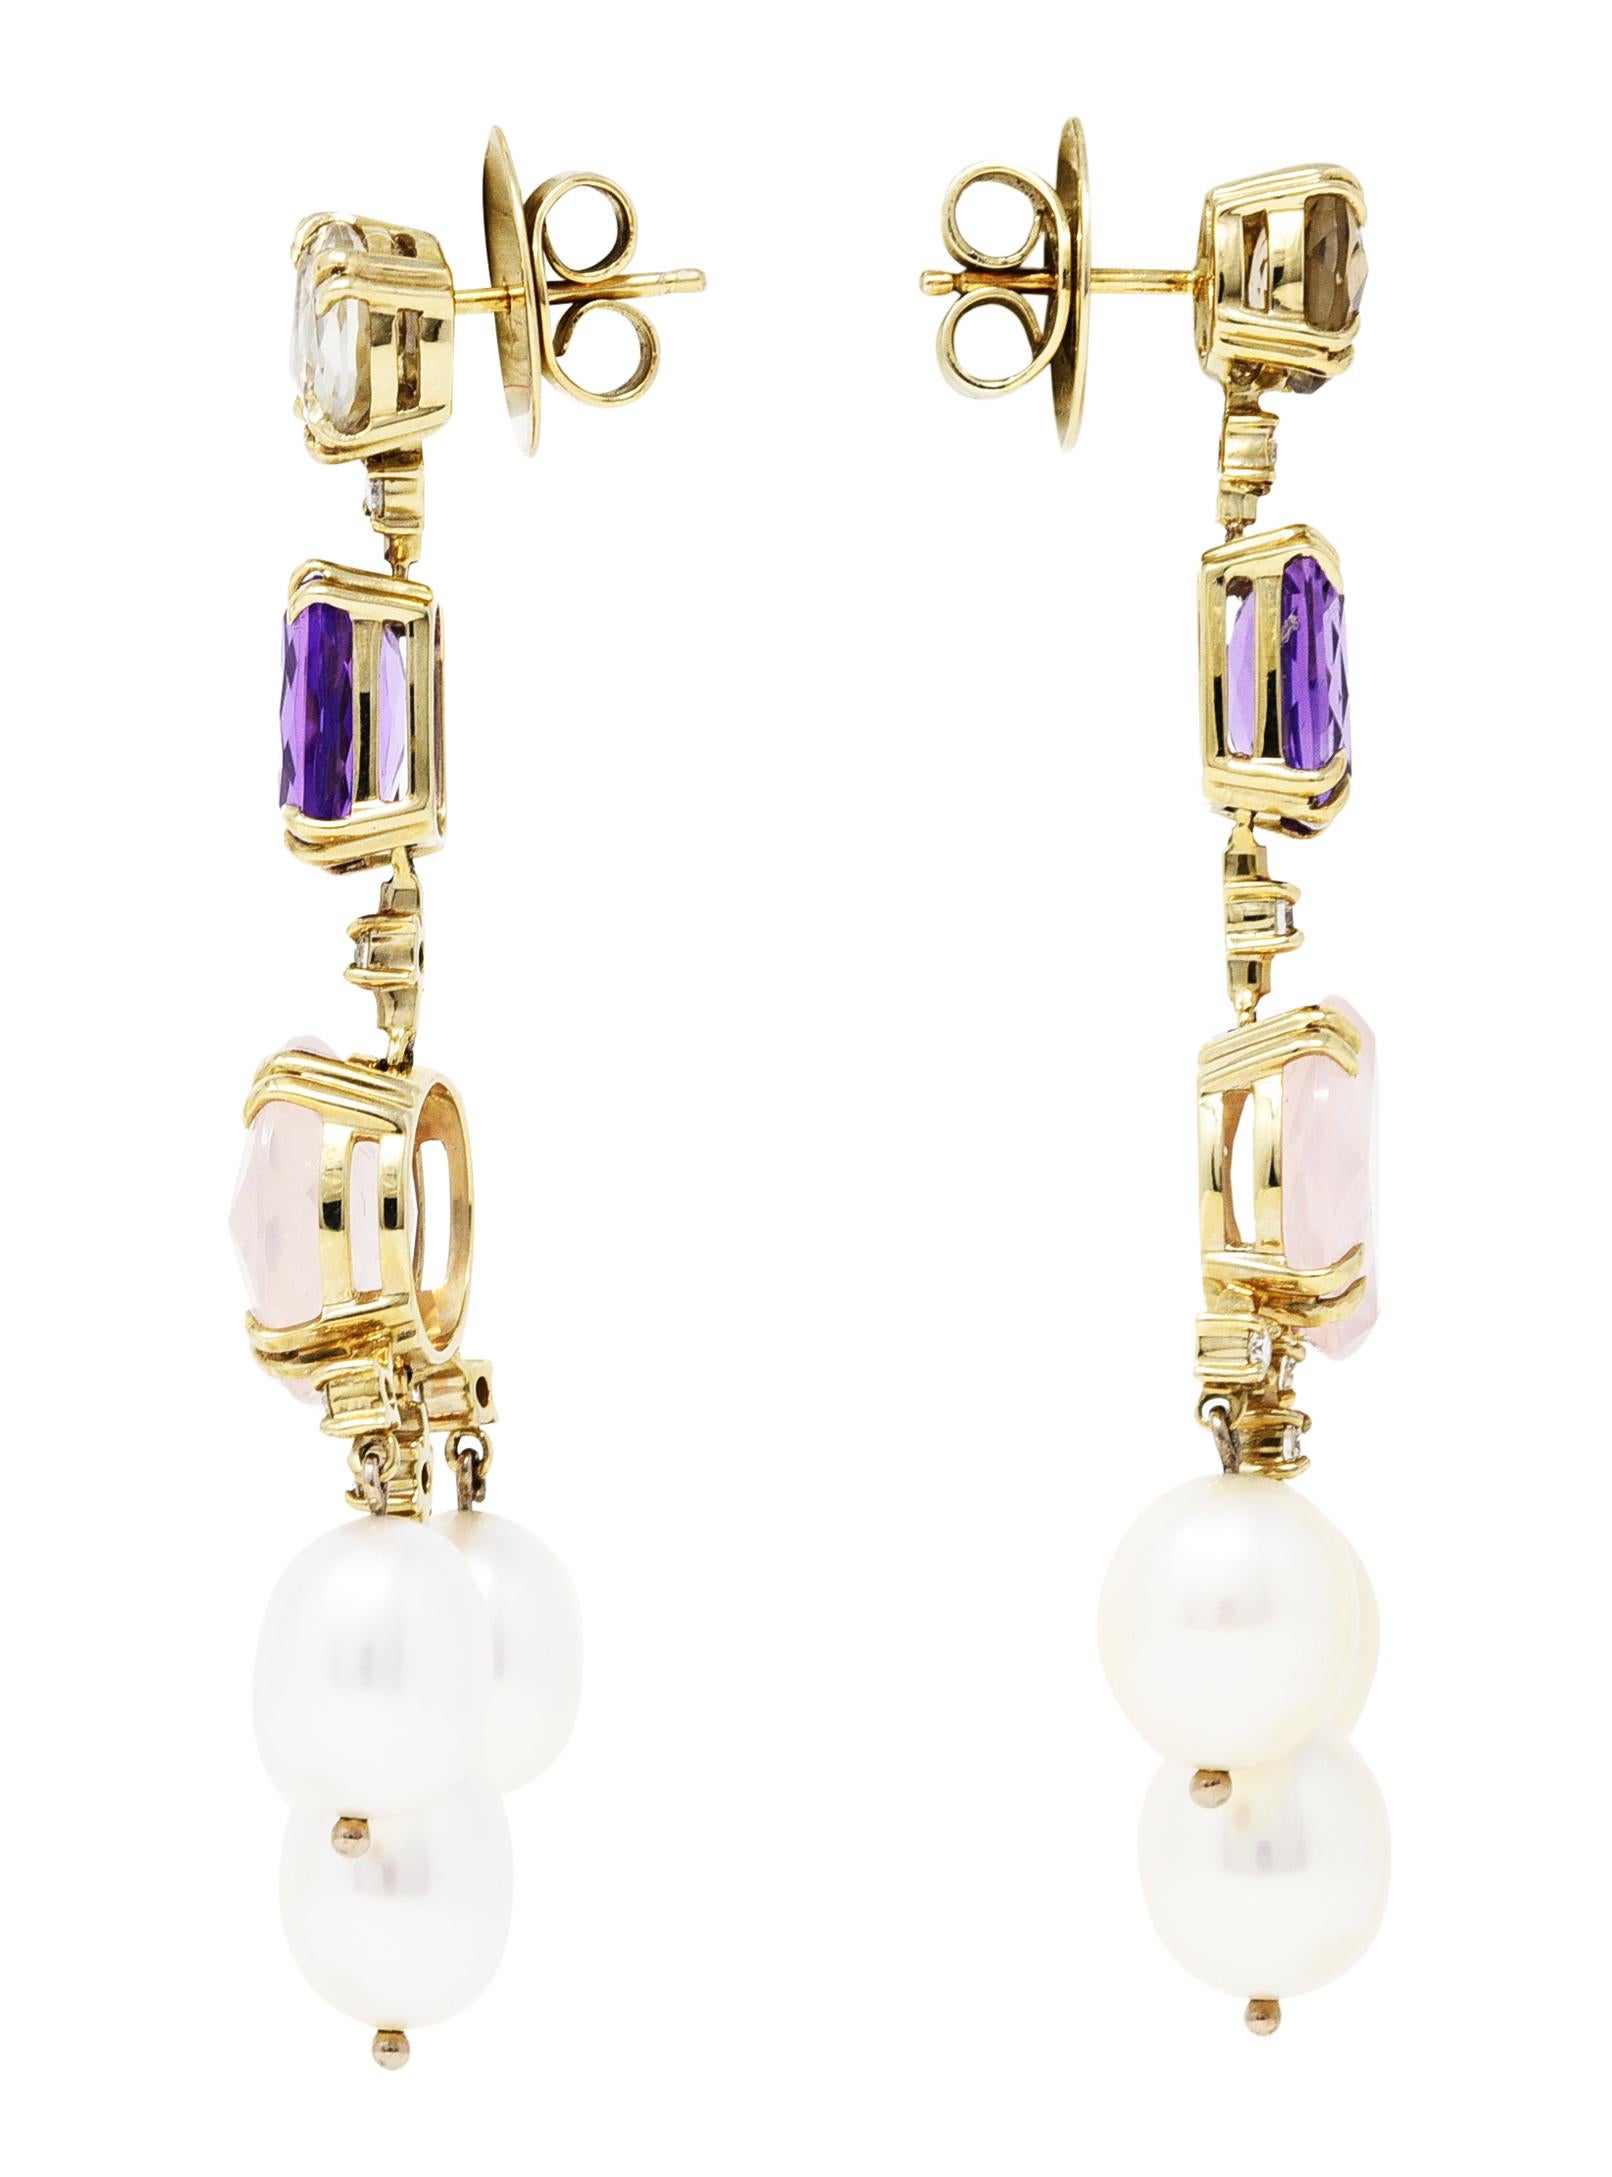 Statement chandelier style earrings are comprised of three basket set gemstones. Surmount is an 8.0 mm mixed round cut champagne quartz - transparent with light brownish yellow color. With mixed cushion cut amethysts measuring approximately 10.0 x